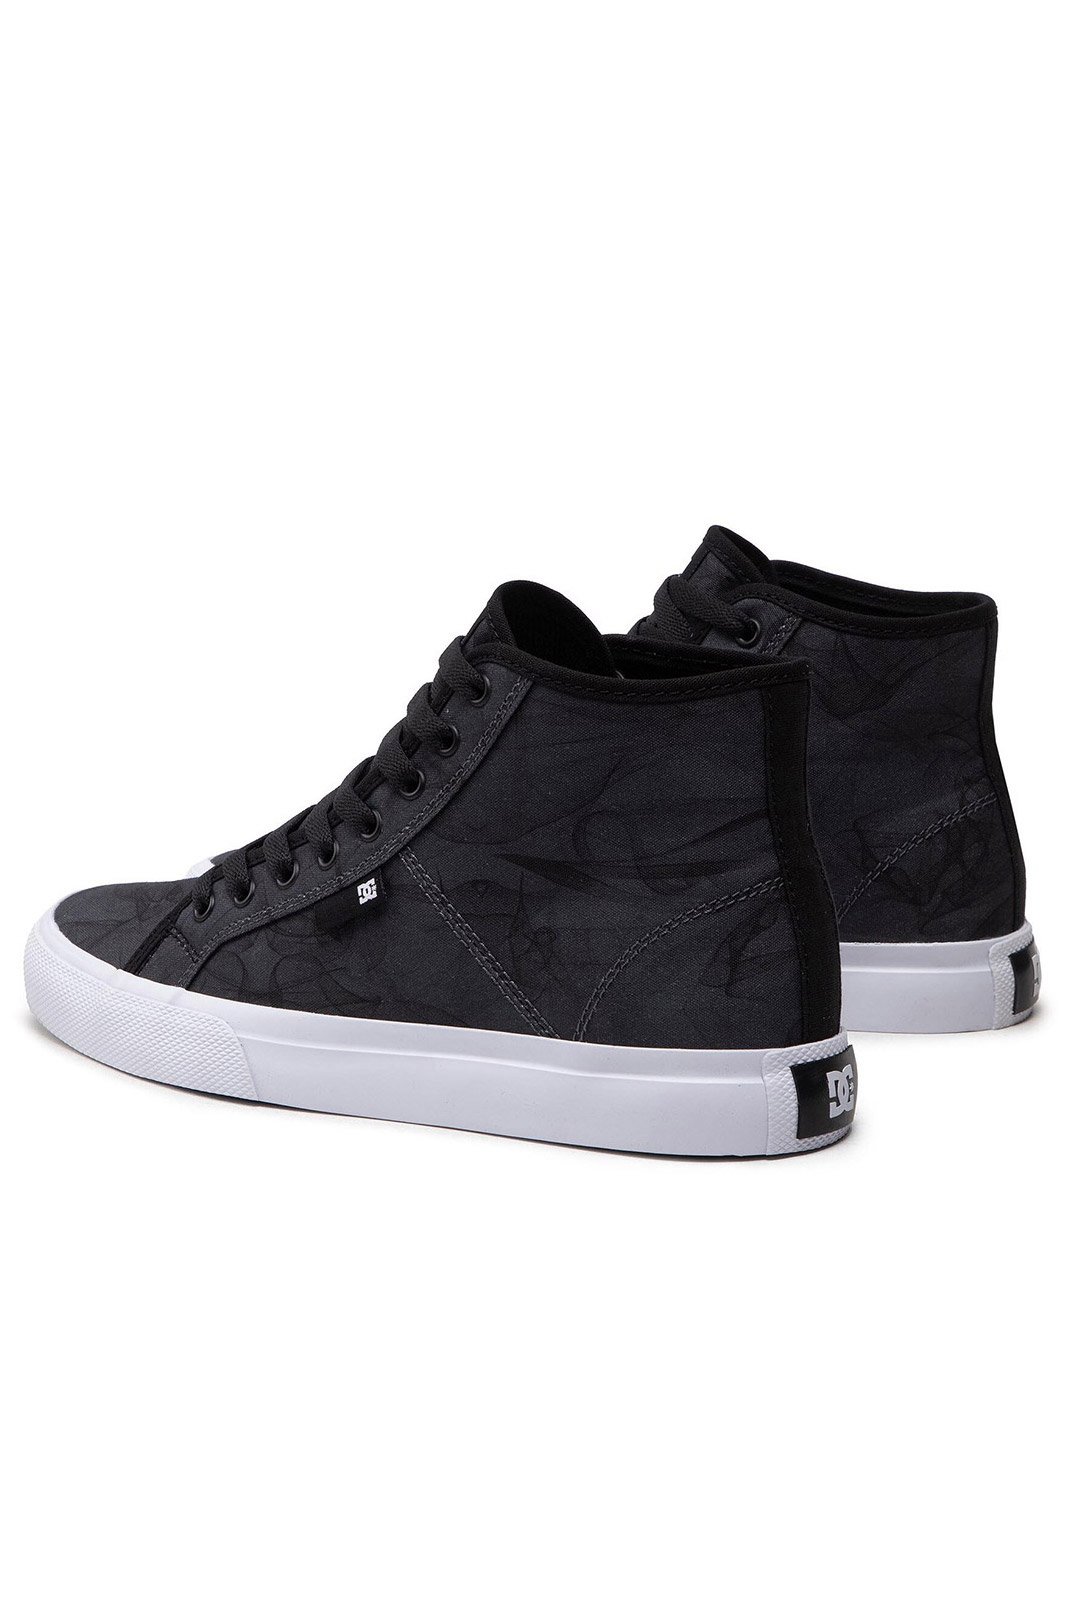 Sneakers / Sport  Dc shoes ADYS300644 DGY